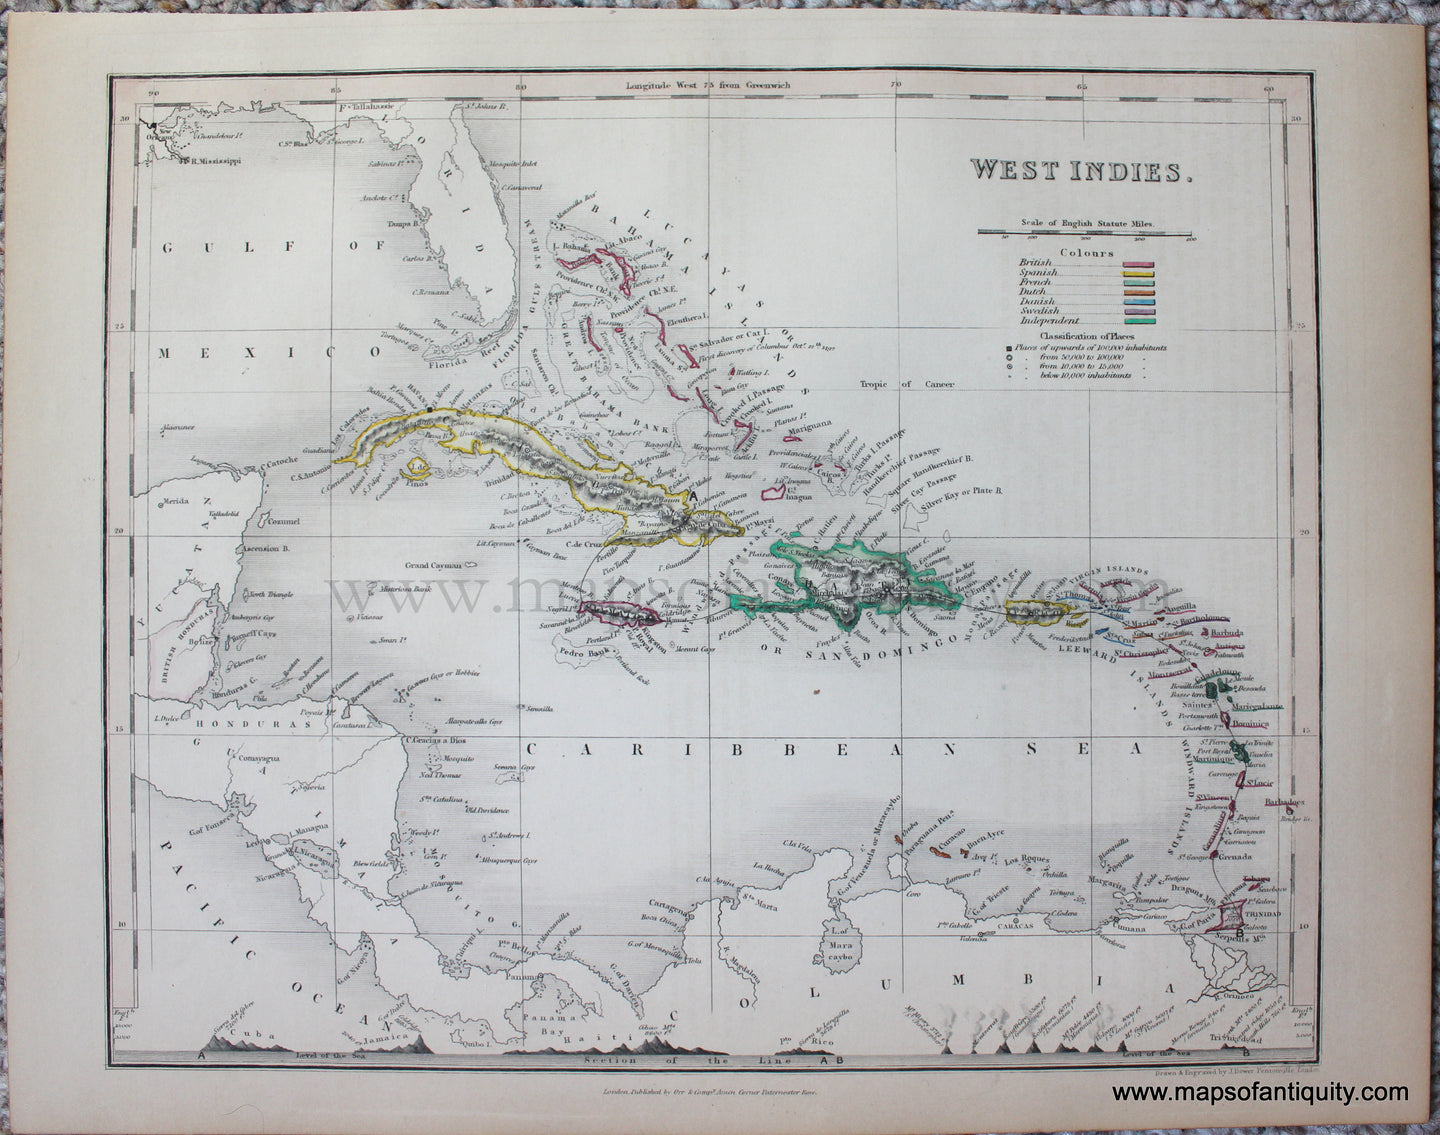 Genuine-Antique-Map-West-Indies-Caribbean--1850-Petermann-/-Orr-/-Dower-Maps-Of-Antiquity-1800s-19th-century